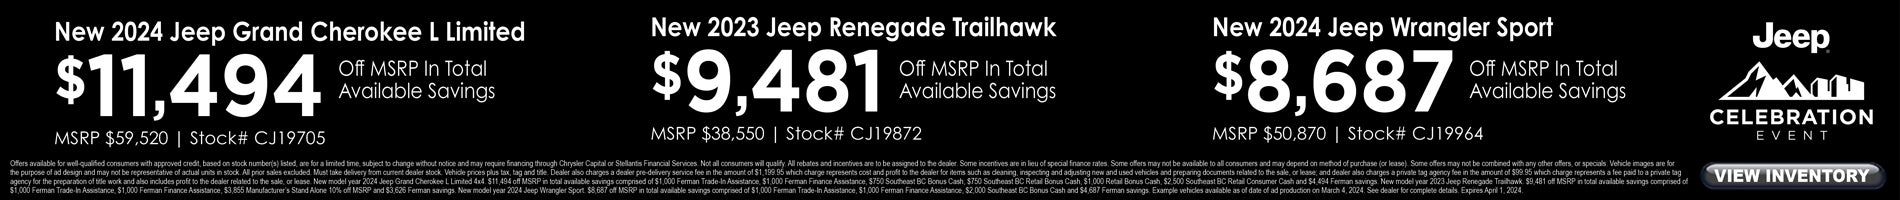 March Savings on New Grand Cherokee L, Renegade and Wrangler